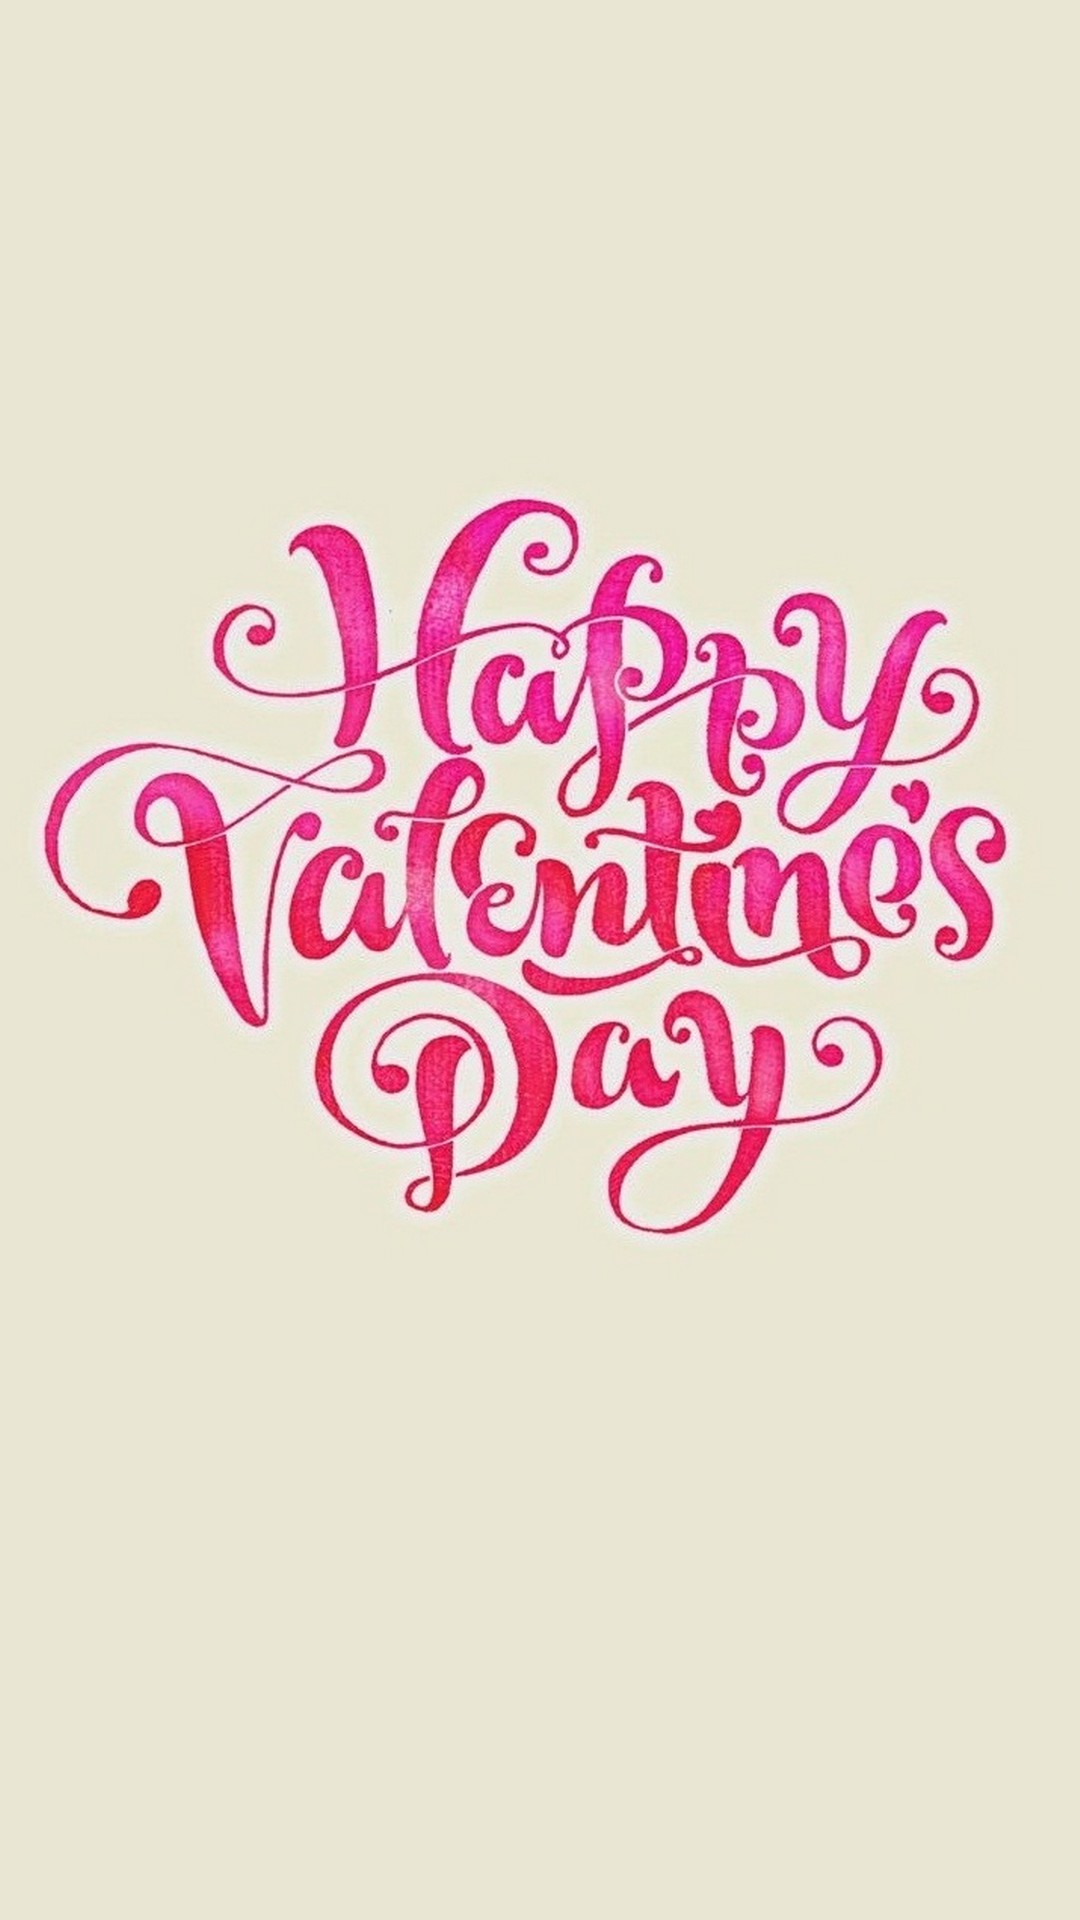 Android Wallpaper Happy Valentines Day Images with HD resolution 1080x1920